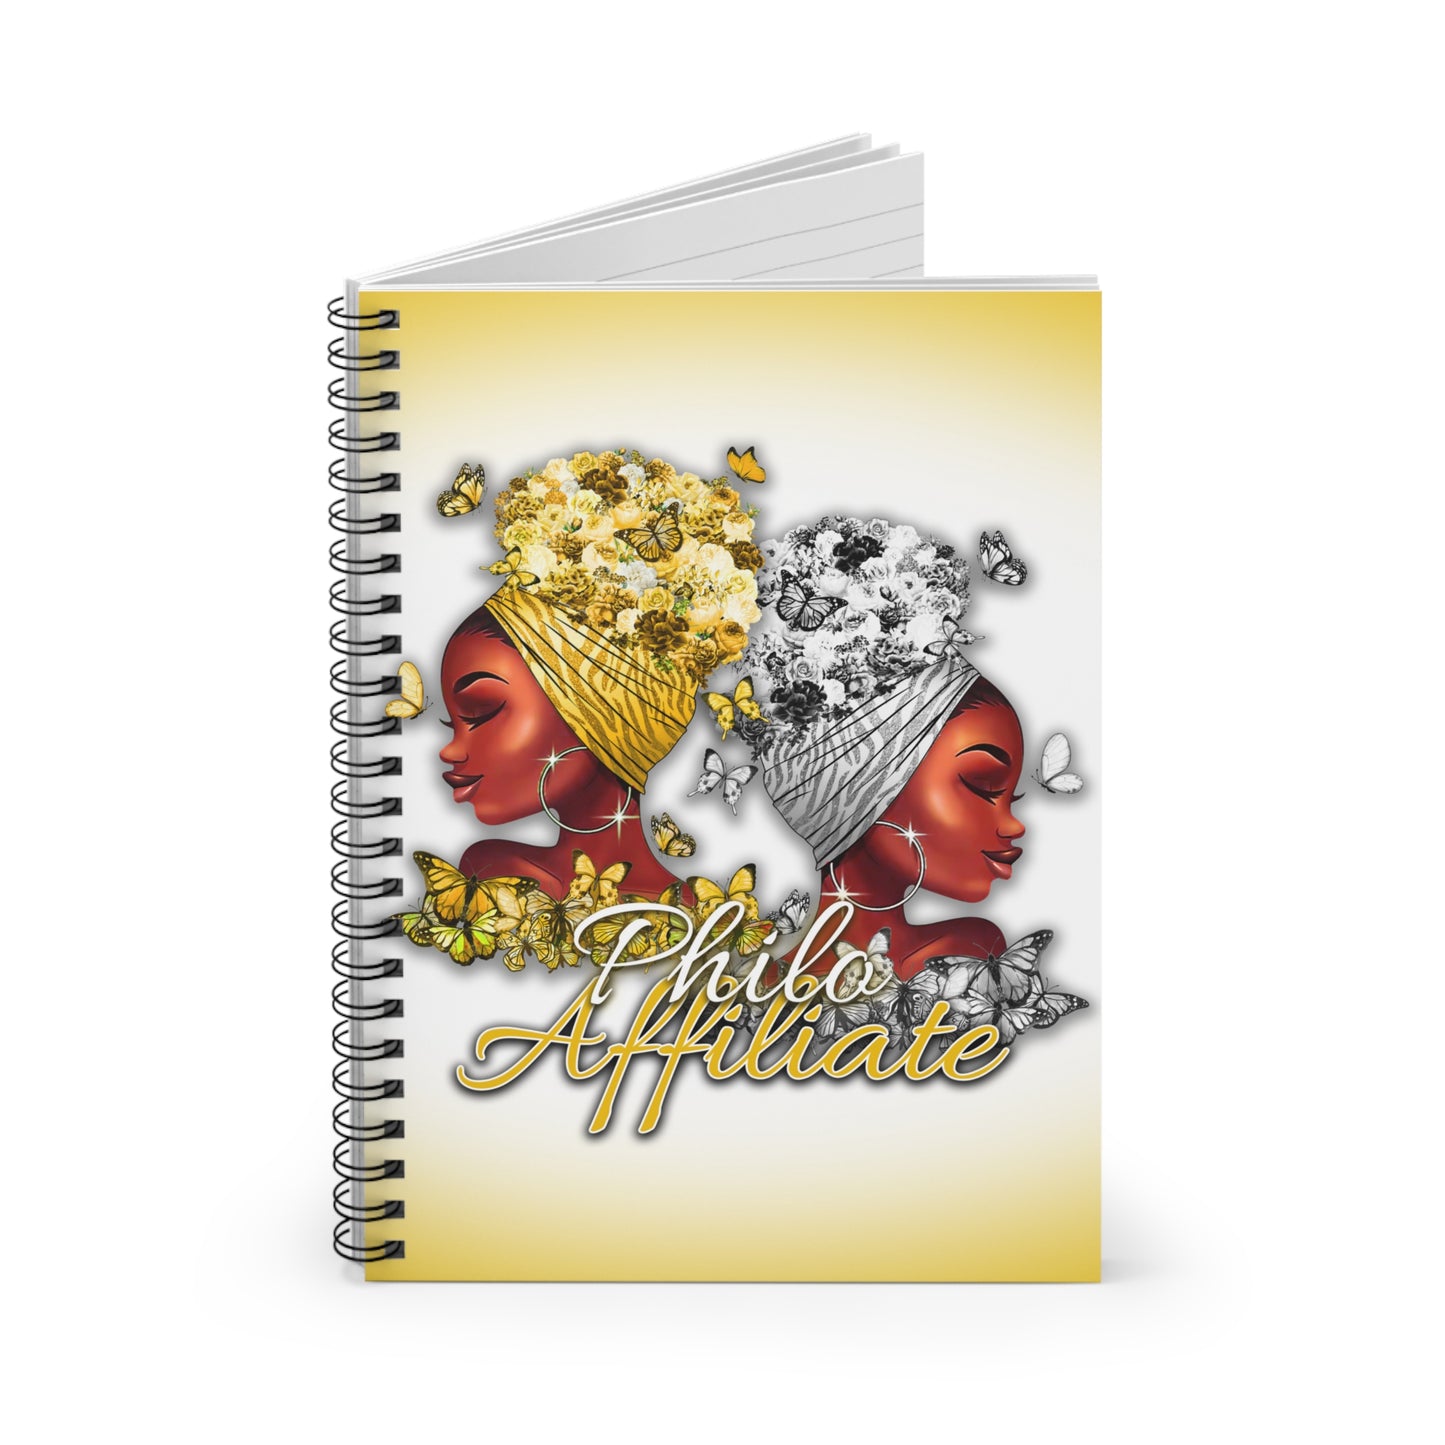 Philo Affiliate Wraps & Butterflies (white) - Spiral Notebook Ruled Line